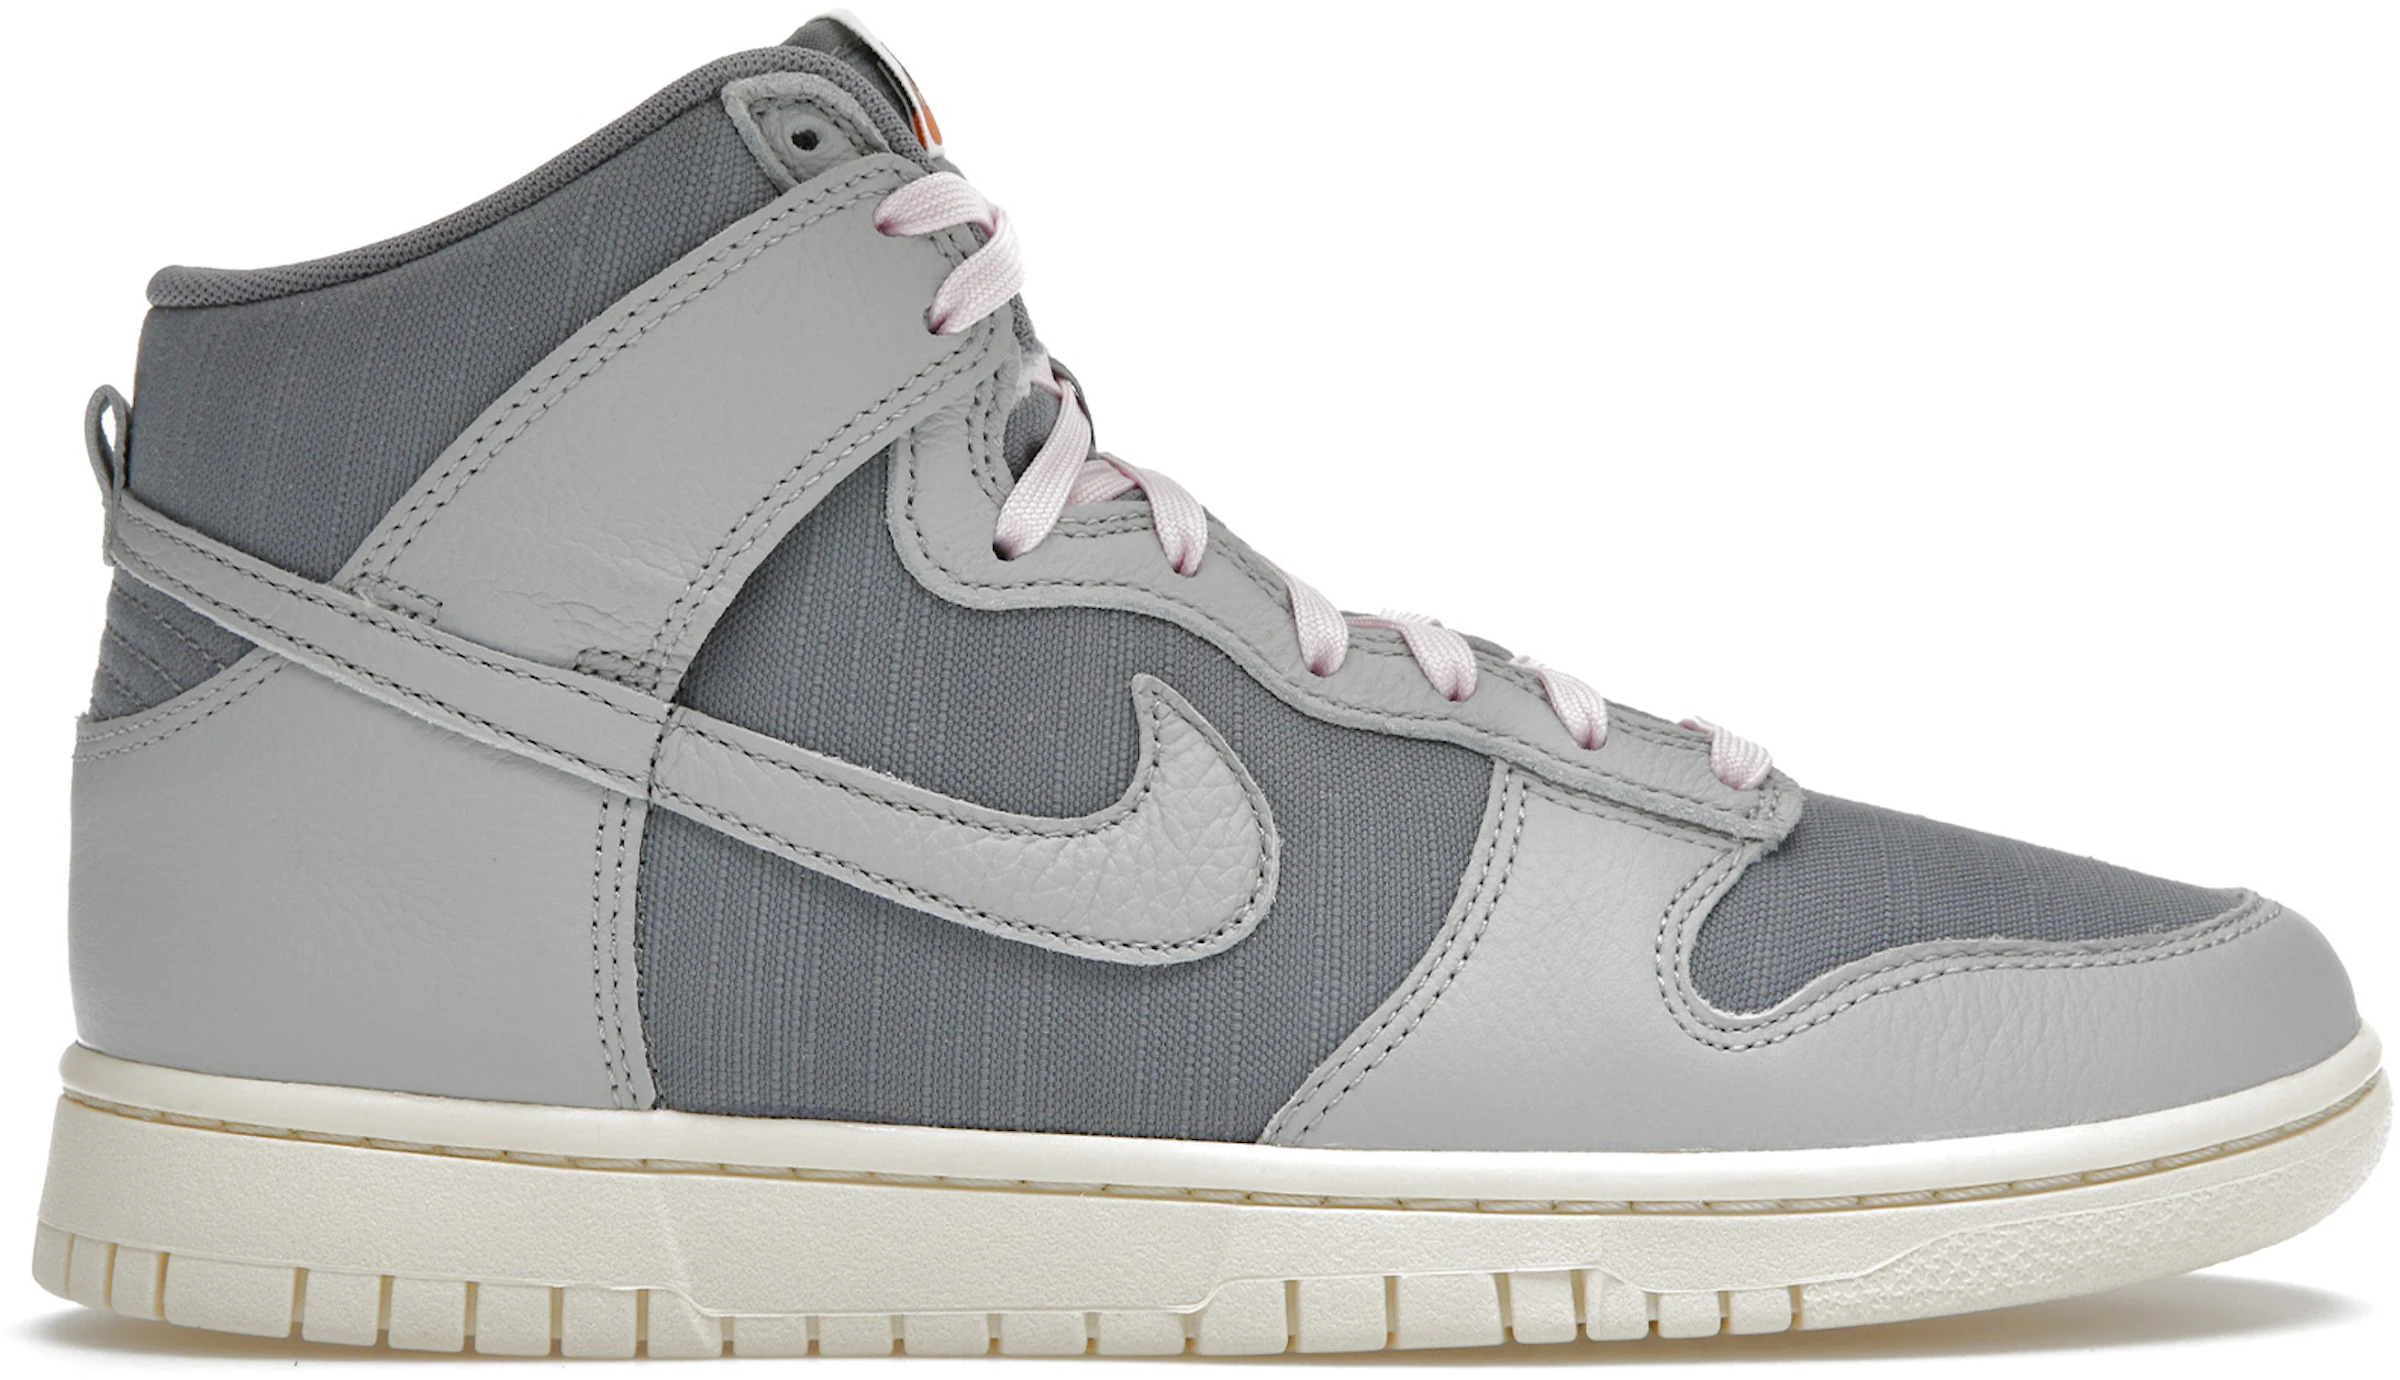 Nike Dunk High Premium Certified Fresh Particle Grey - DQ8800-001 US